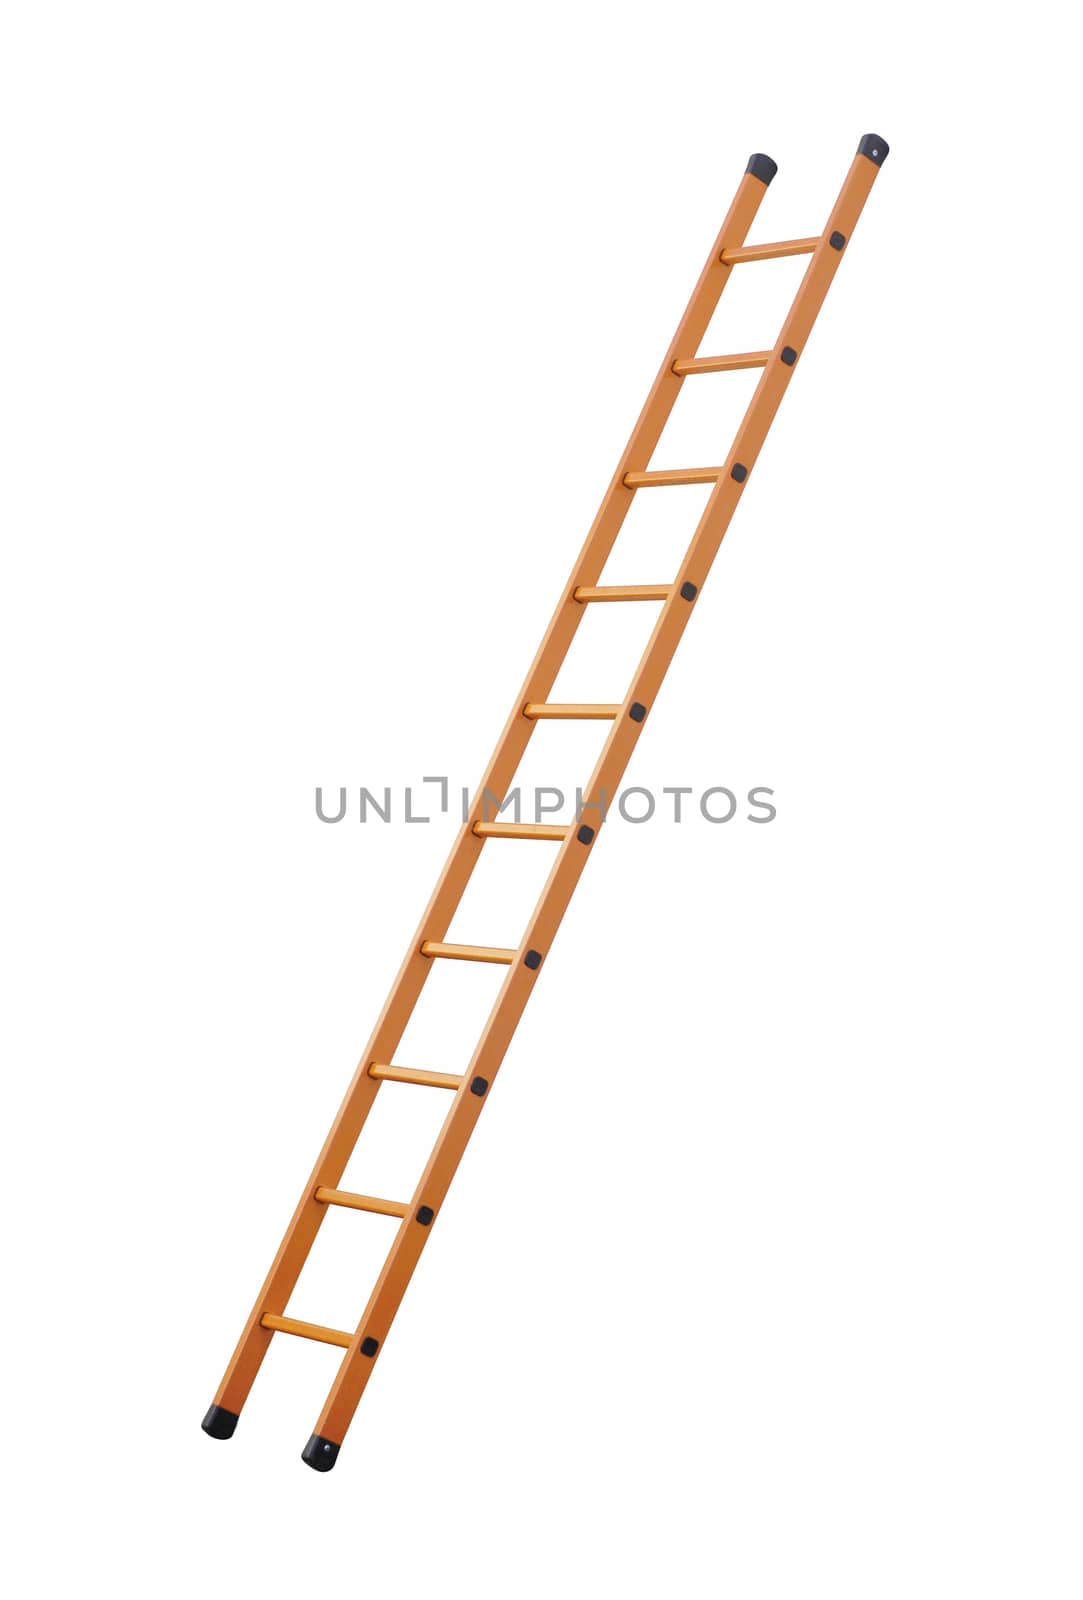 Ladder (clipping path!) isolated on white background by myyaym